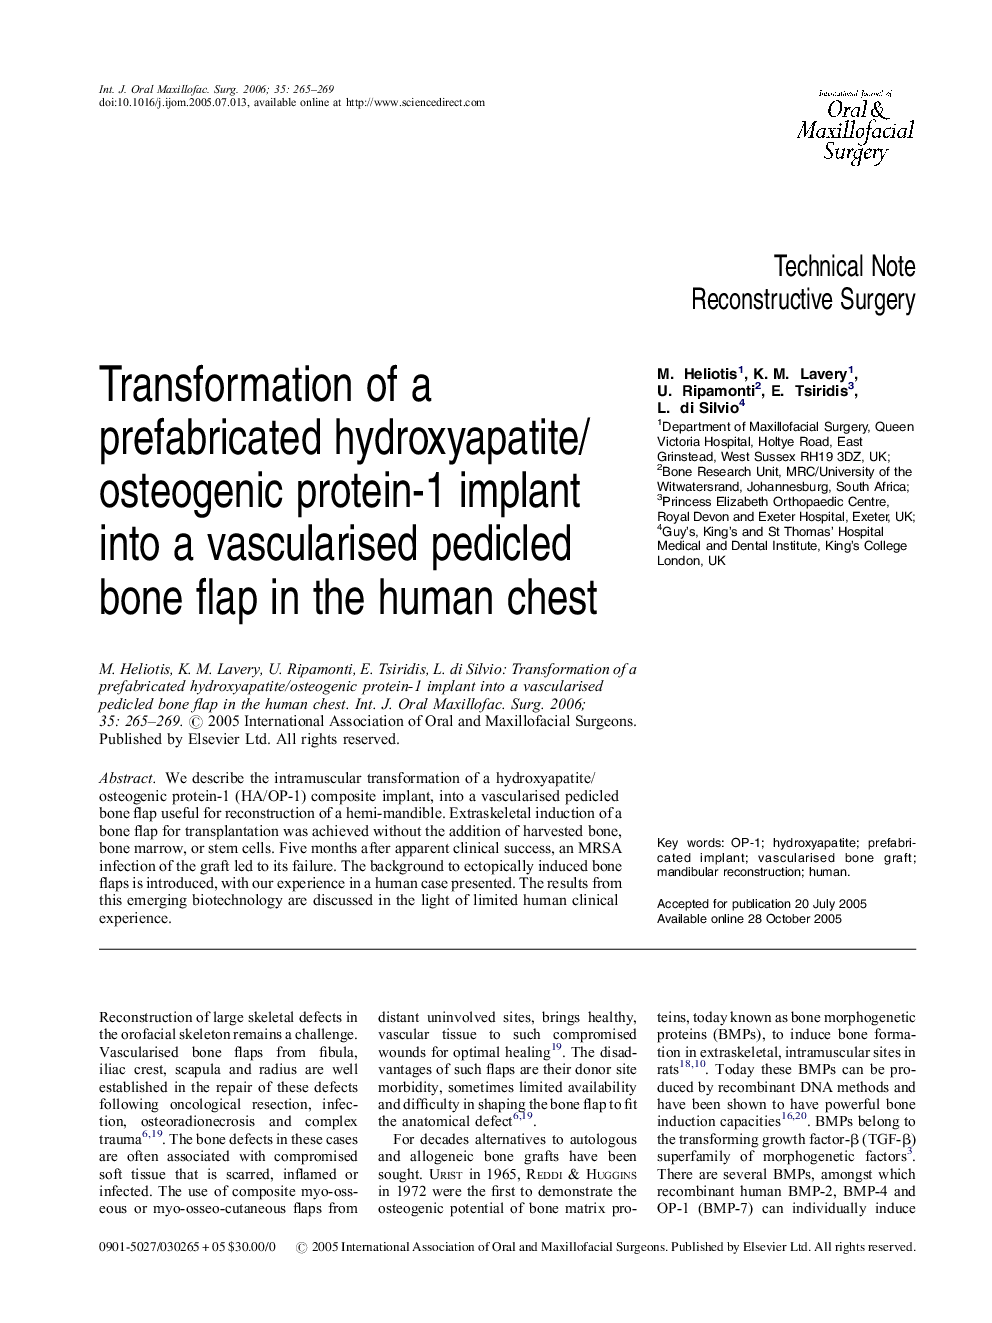 Transformation of a prefabricated hydroxyapatite/osteogenic protein-1 implant into a vascularised pedicled bone flap in the human chest